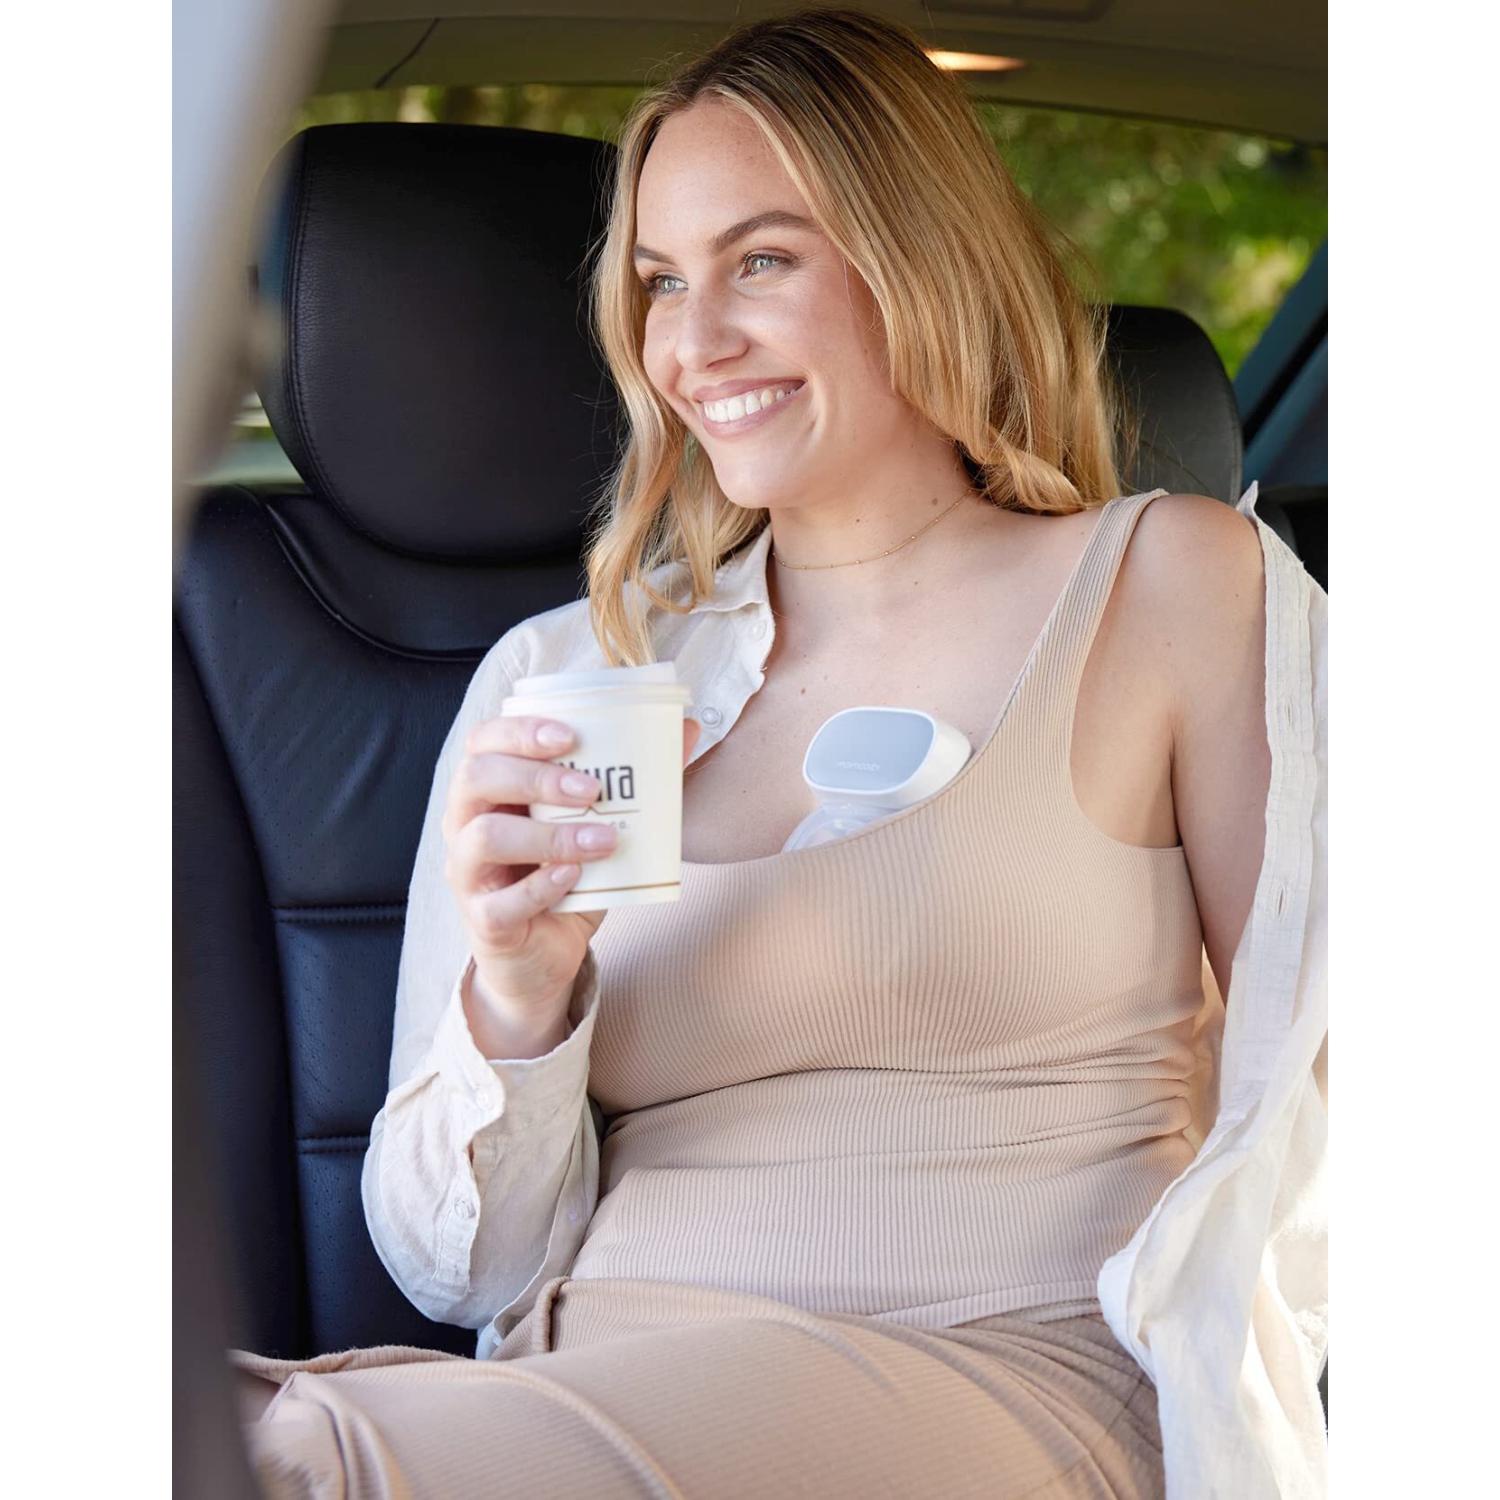 Momcozy S9 Pro Double Wearable Breast Pump Hands Free - Open Box - Key  Biscayne Magazine